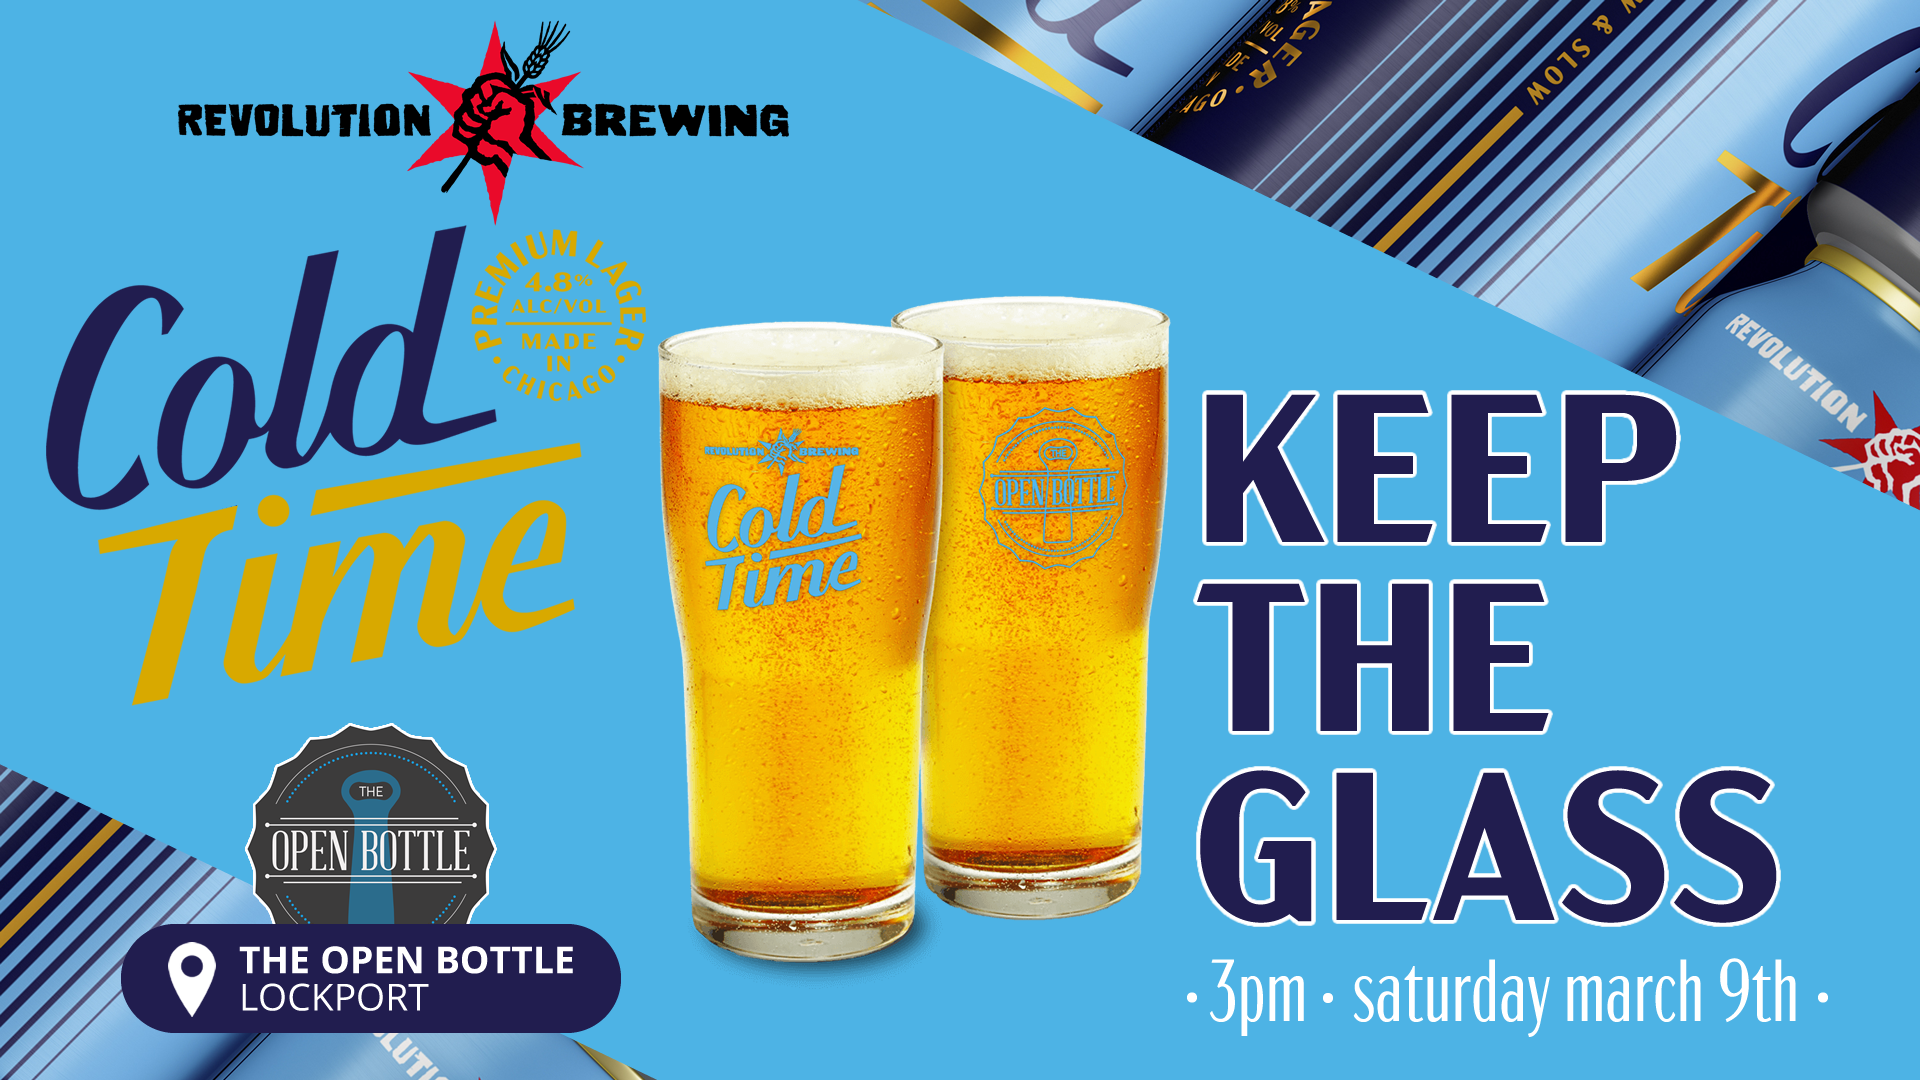 Event: Revolution Cold Time Keep the Pint Night